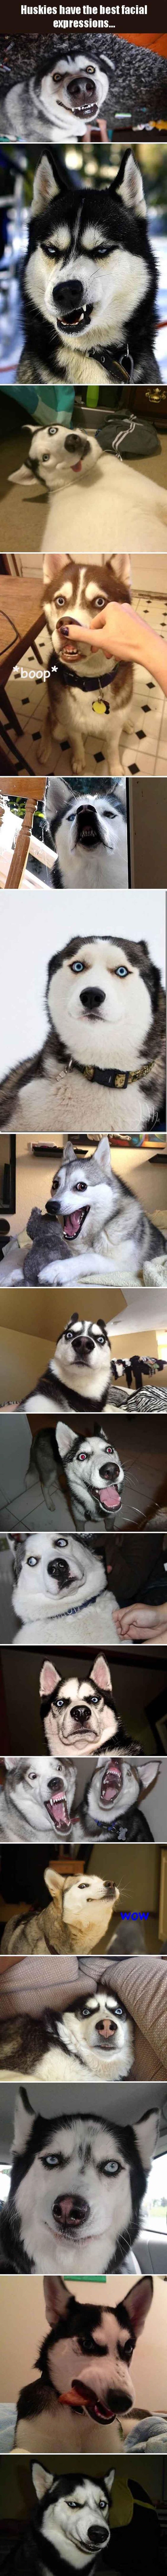 Huskies Have The Best Facial Expressions 17 Pics